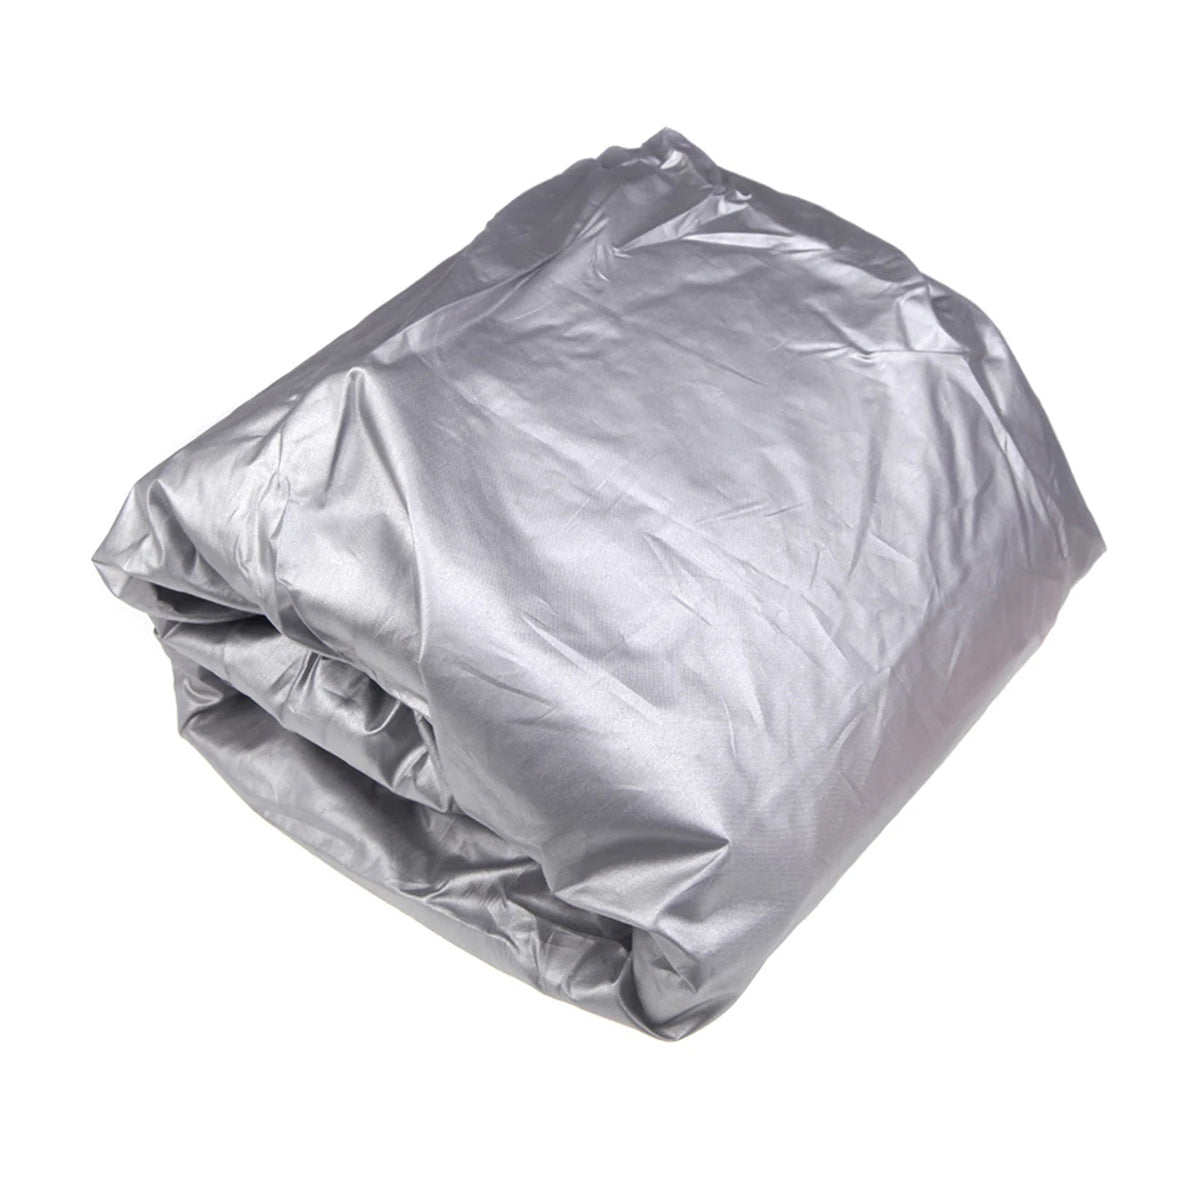 Car Cover Waterproof All Weather for Automobiles, Custom fit for Car, Outdoor Full Cover Rain Sun UV Protection